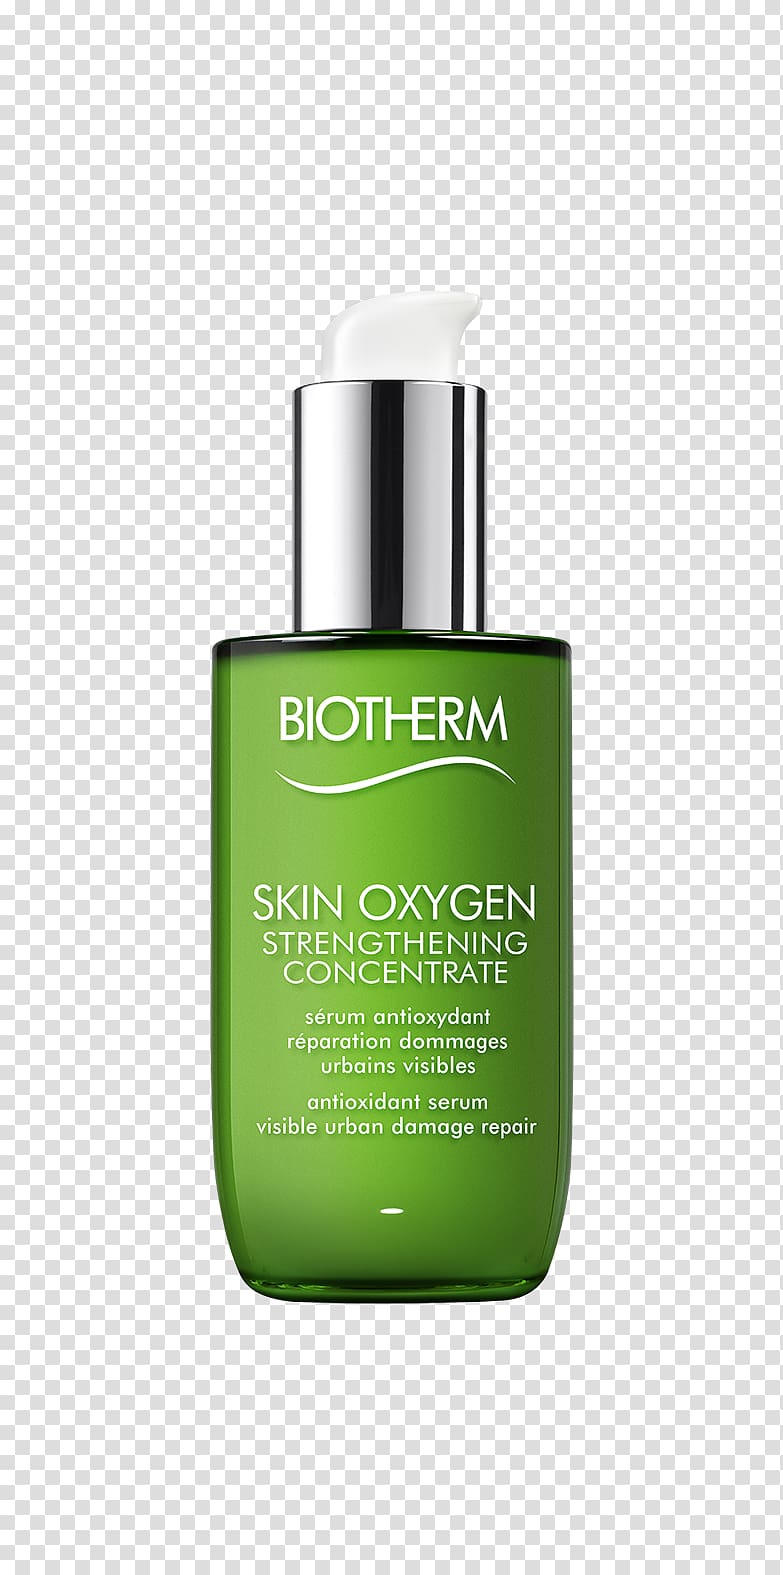 Lotion Skin Serum Oxygen Biotherm, biotherm transparent background PNG clipart